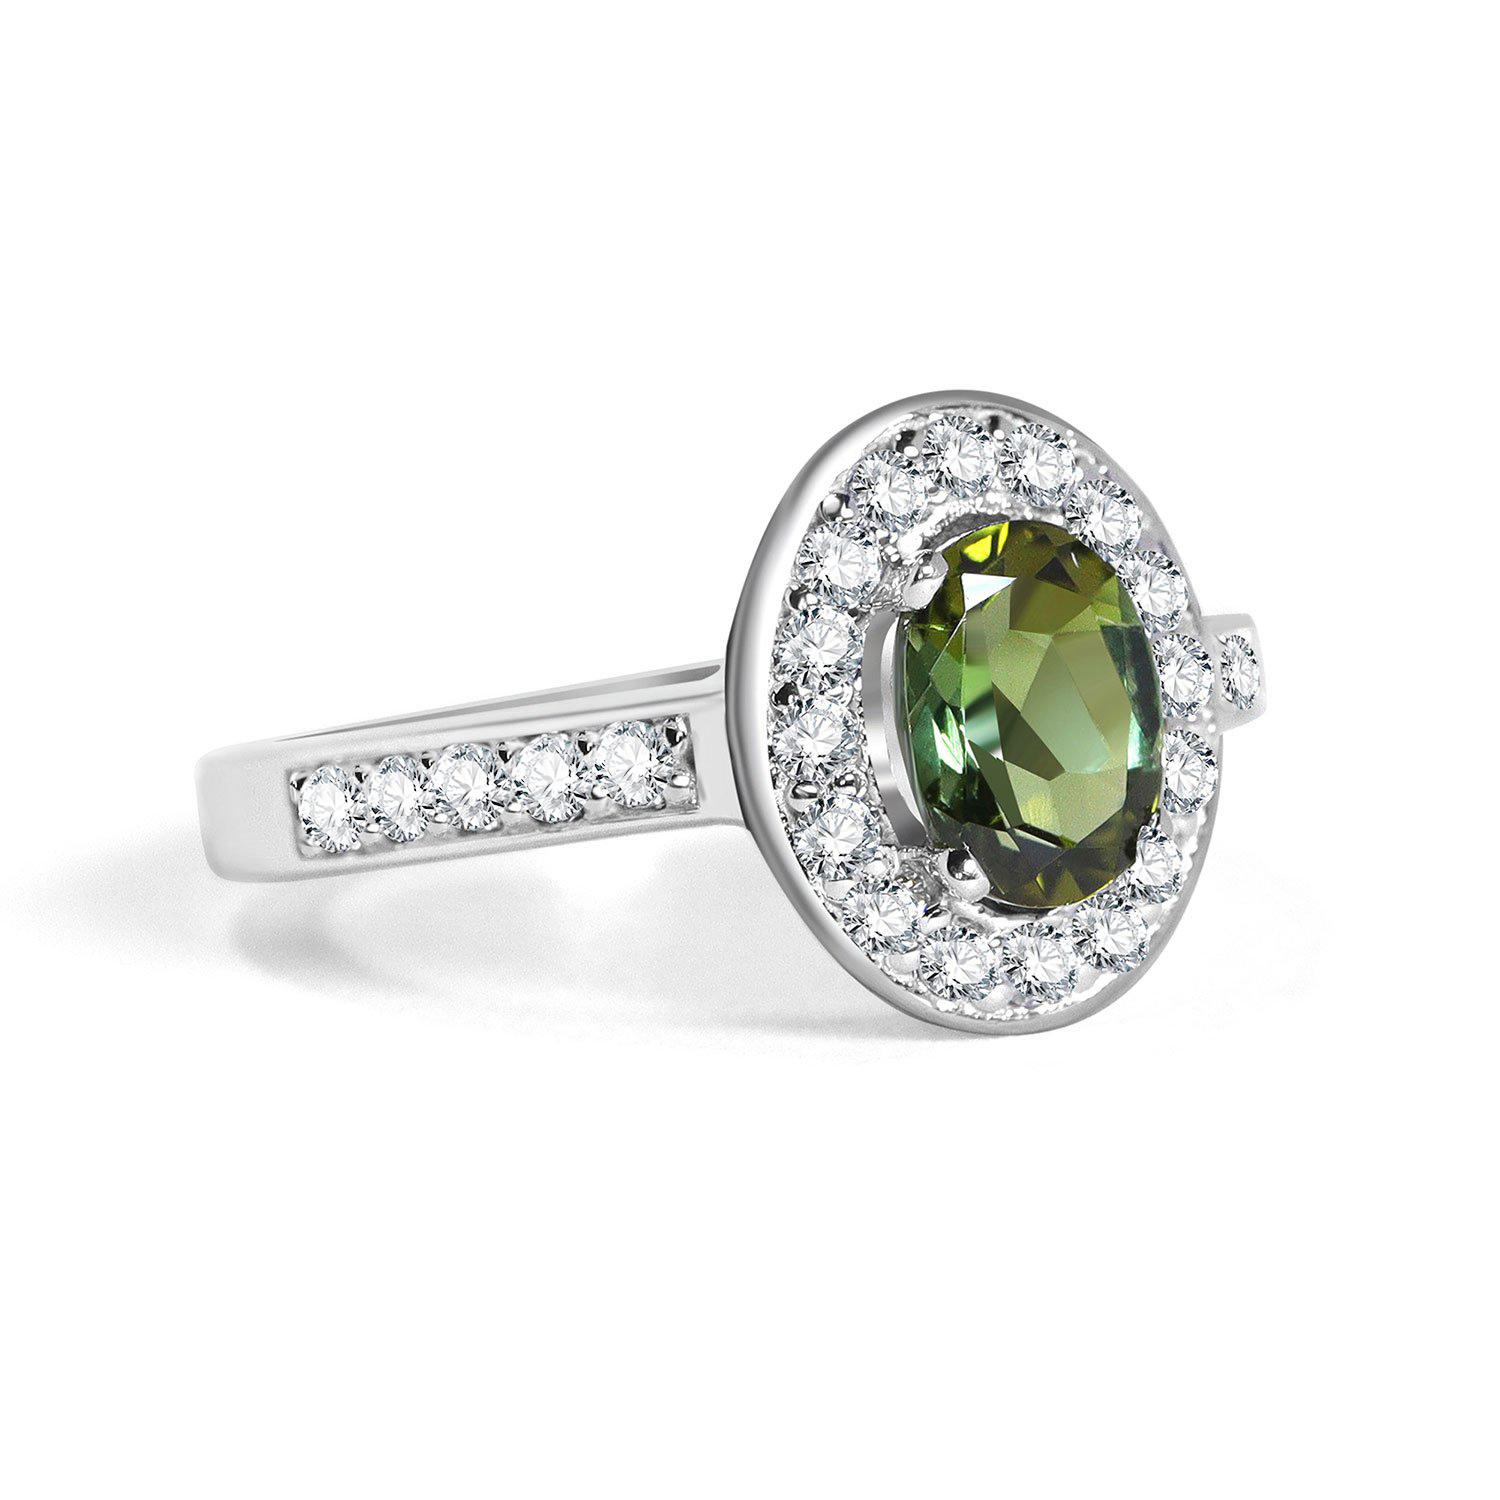 For Sale:  14k White Gold Micropave Sparkling Halo Engagement Ring, Tourmaline & Diamond 2